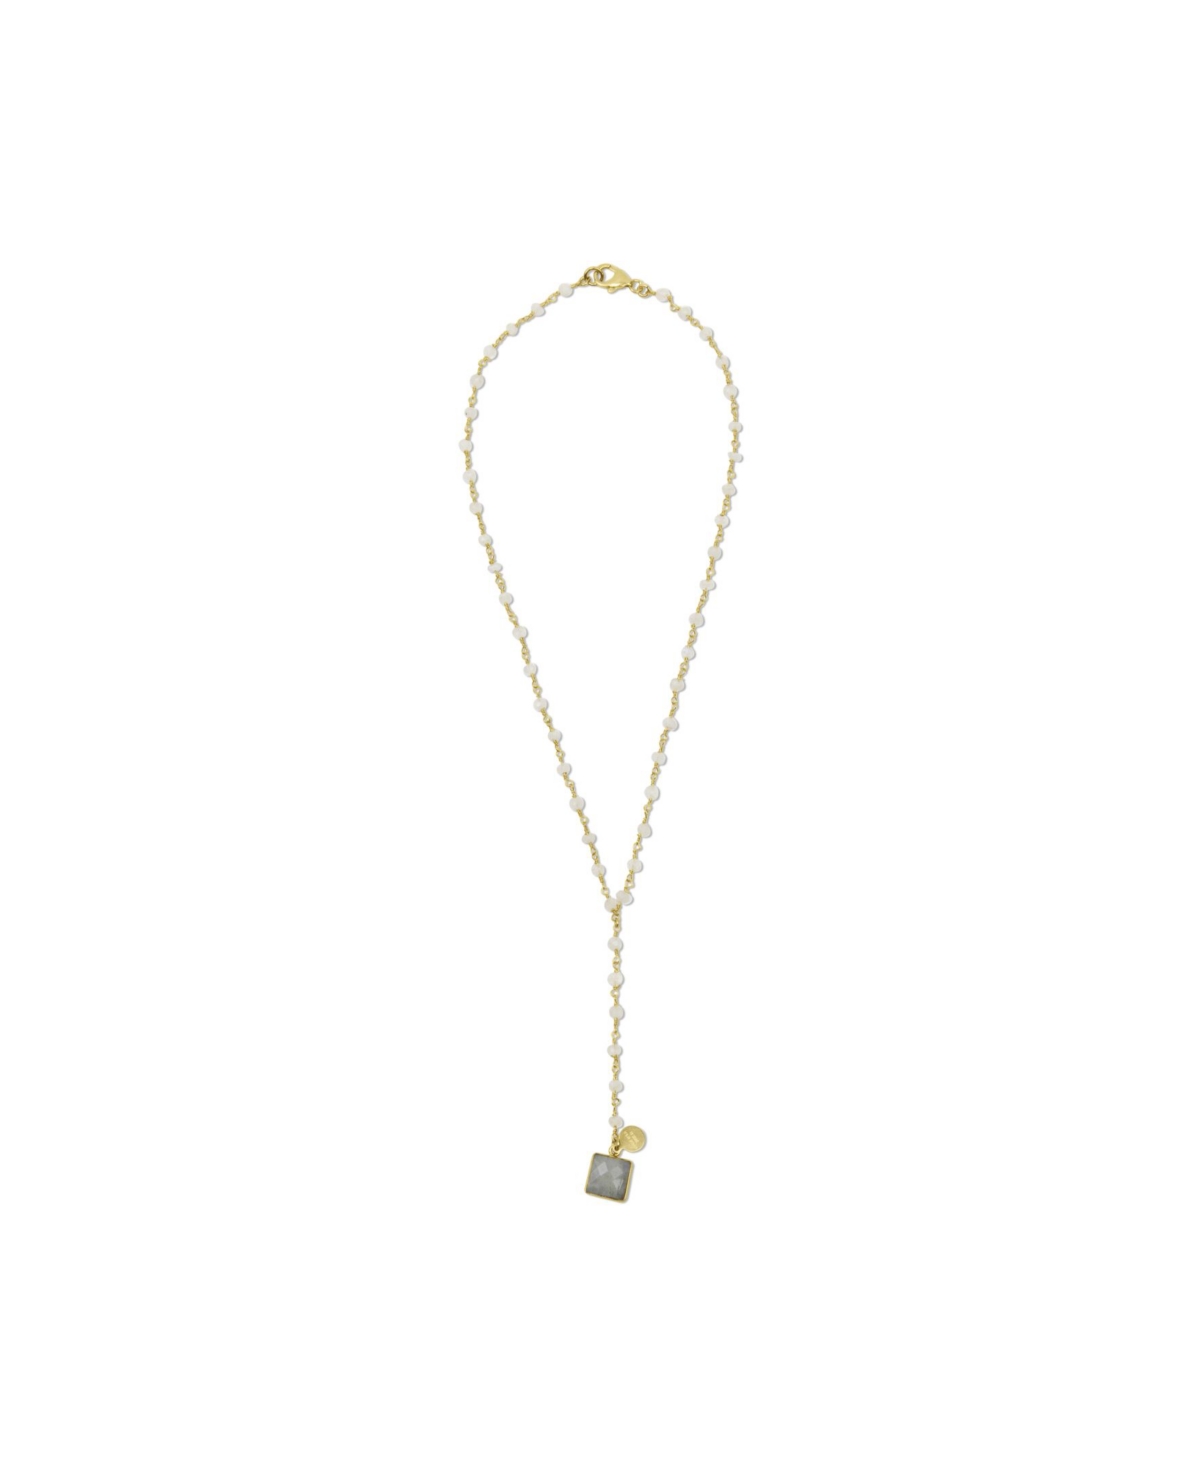 Y-Shaped 14K Gold Fill Necklace with Fully Faceted Moonstone Stones - Gold - Fill